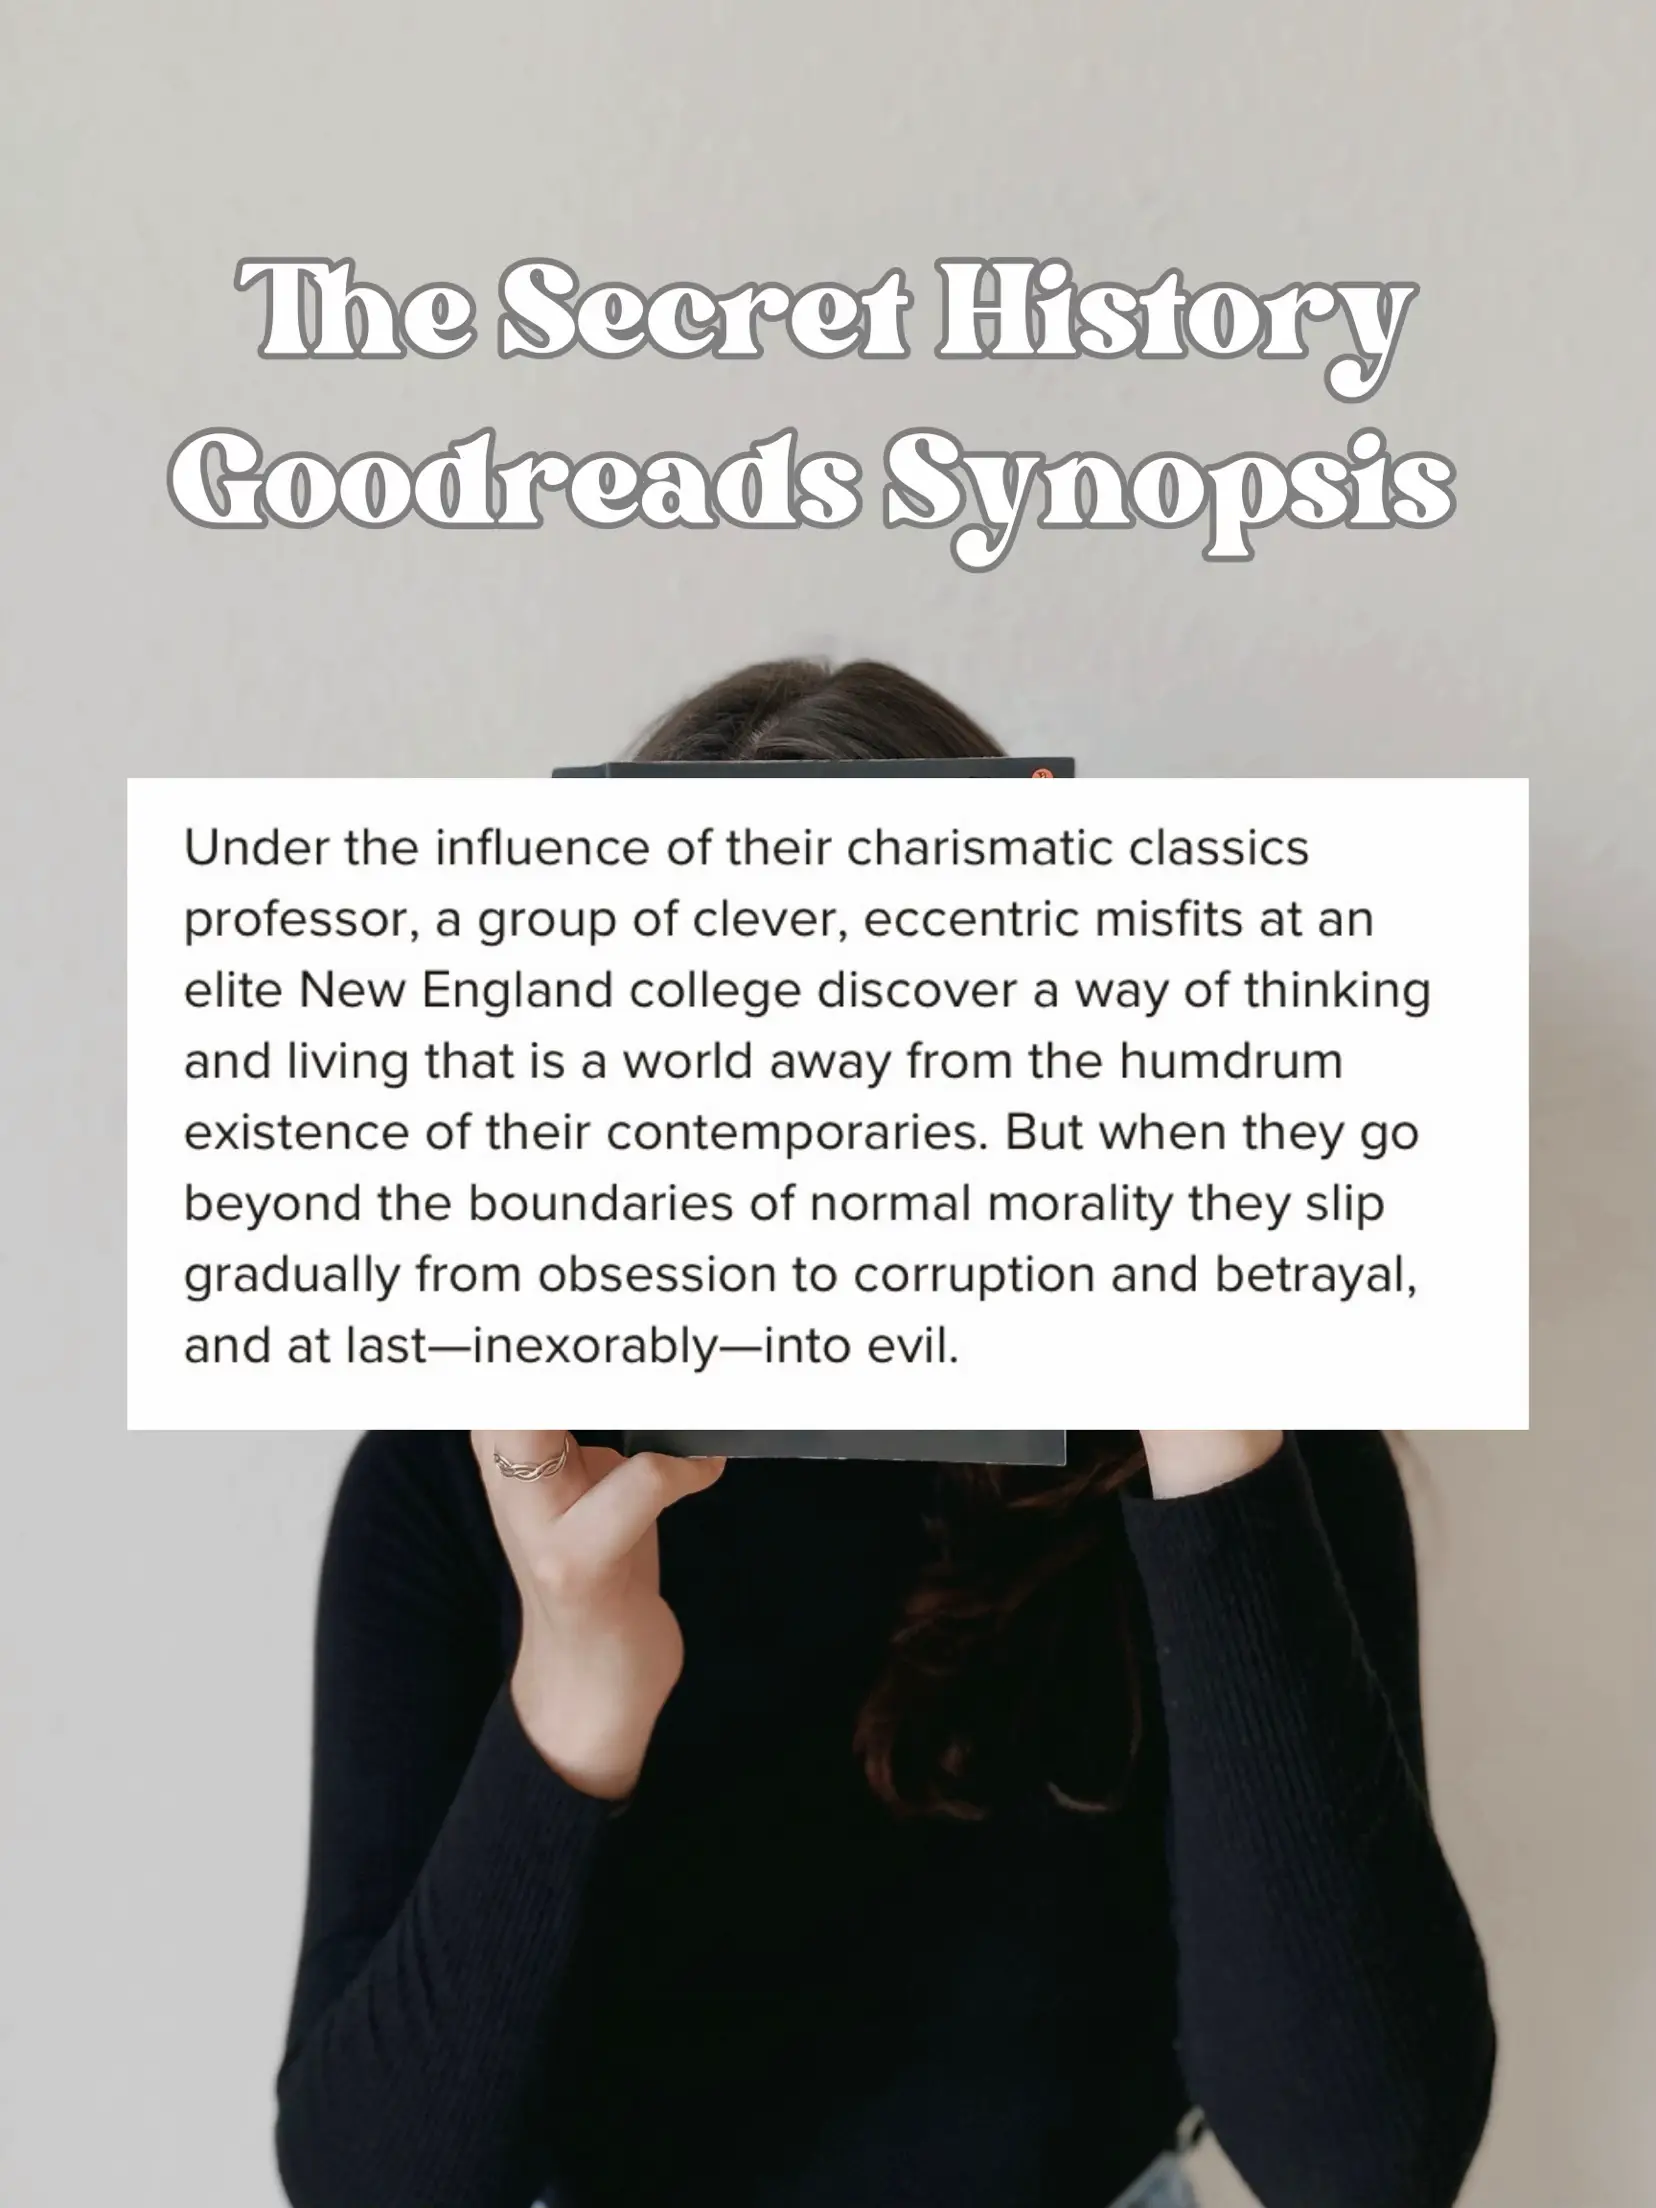 13 Extraordinary Facts About The Secret History - Donna Tartt 